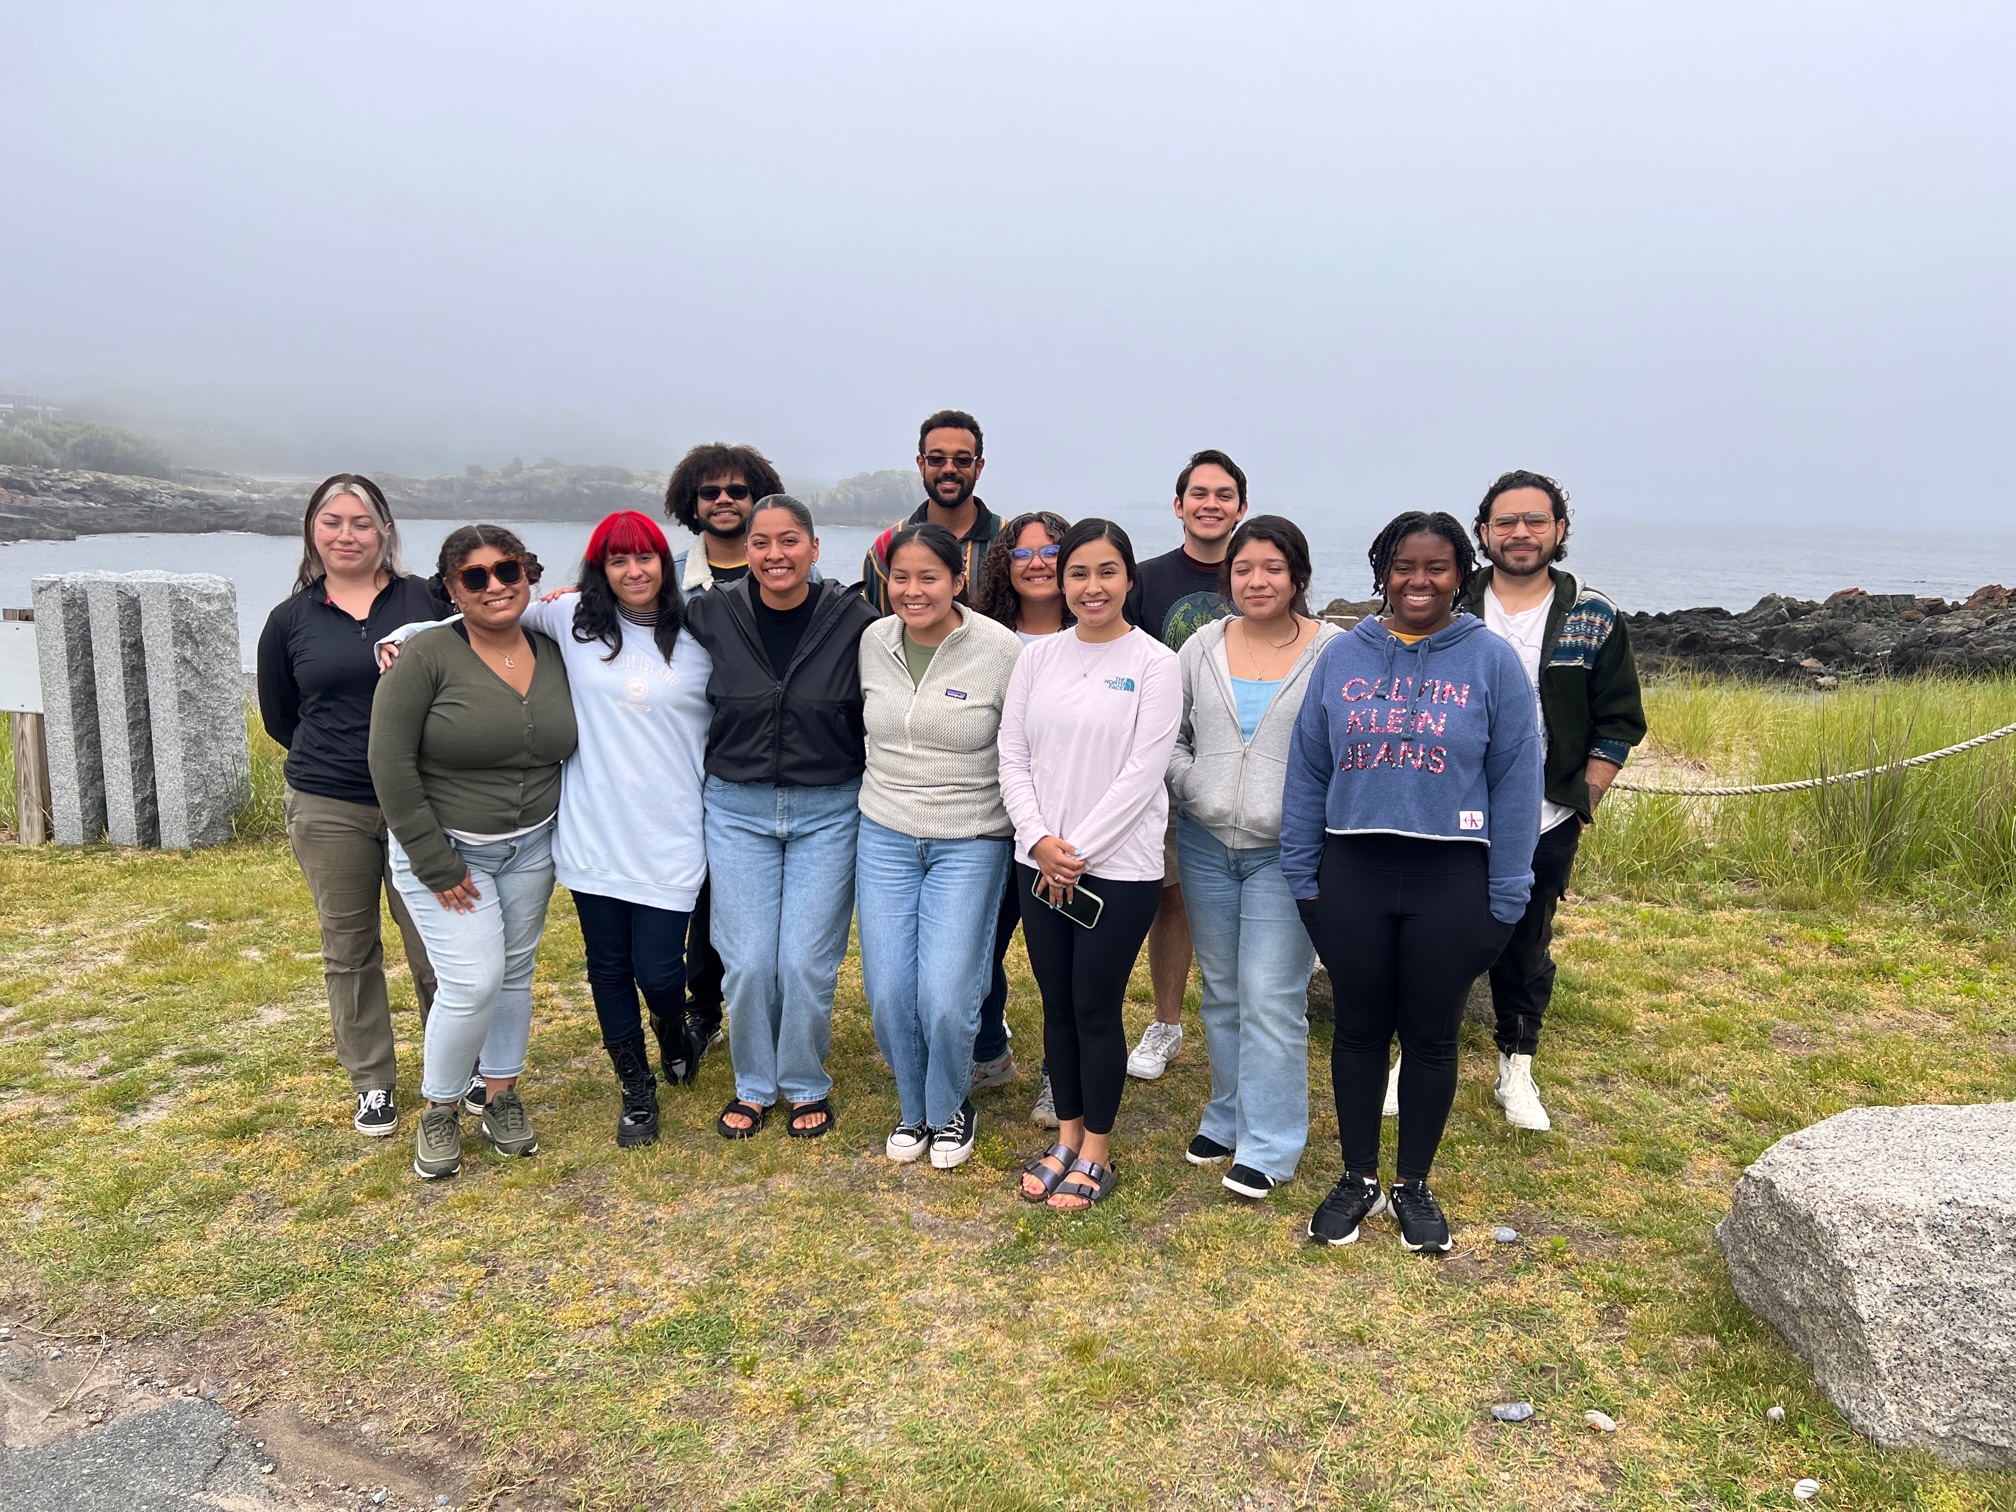 Group photo of students gathered together in front of a foggy cliff, overlooking the ocean.